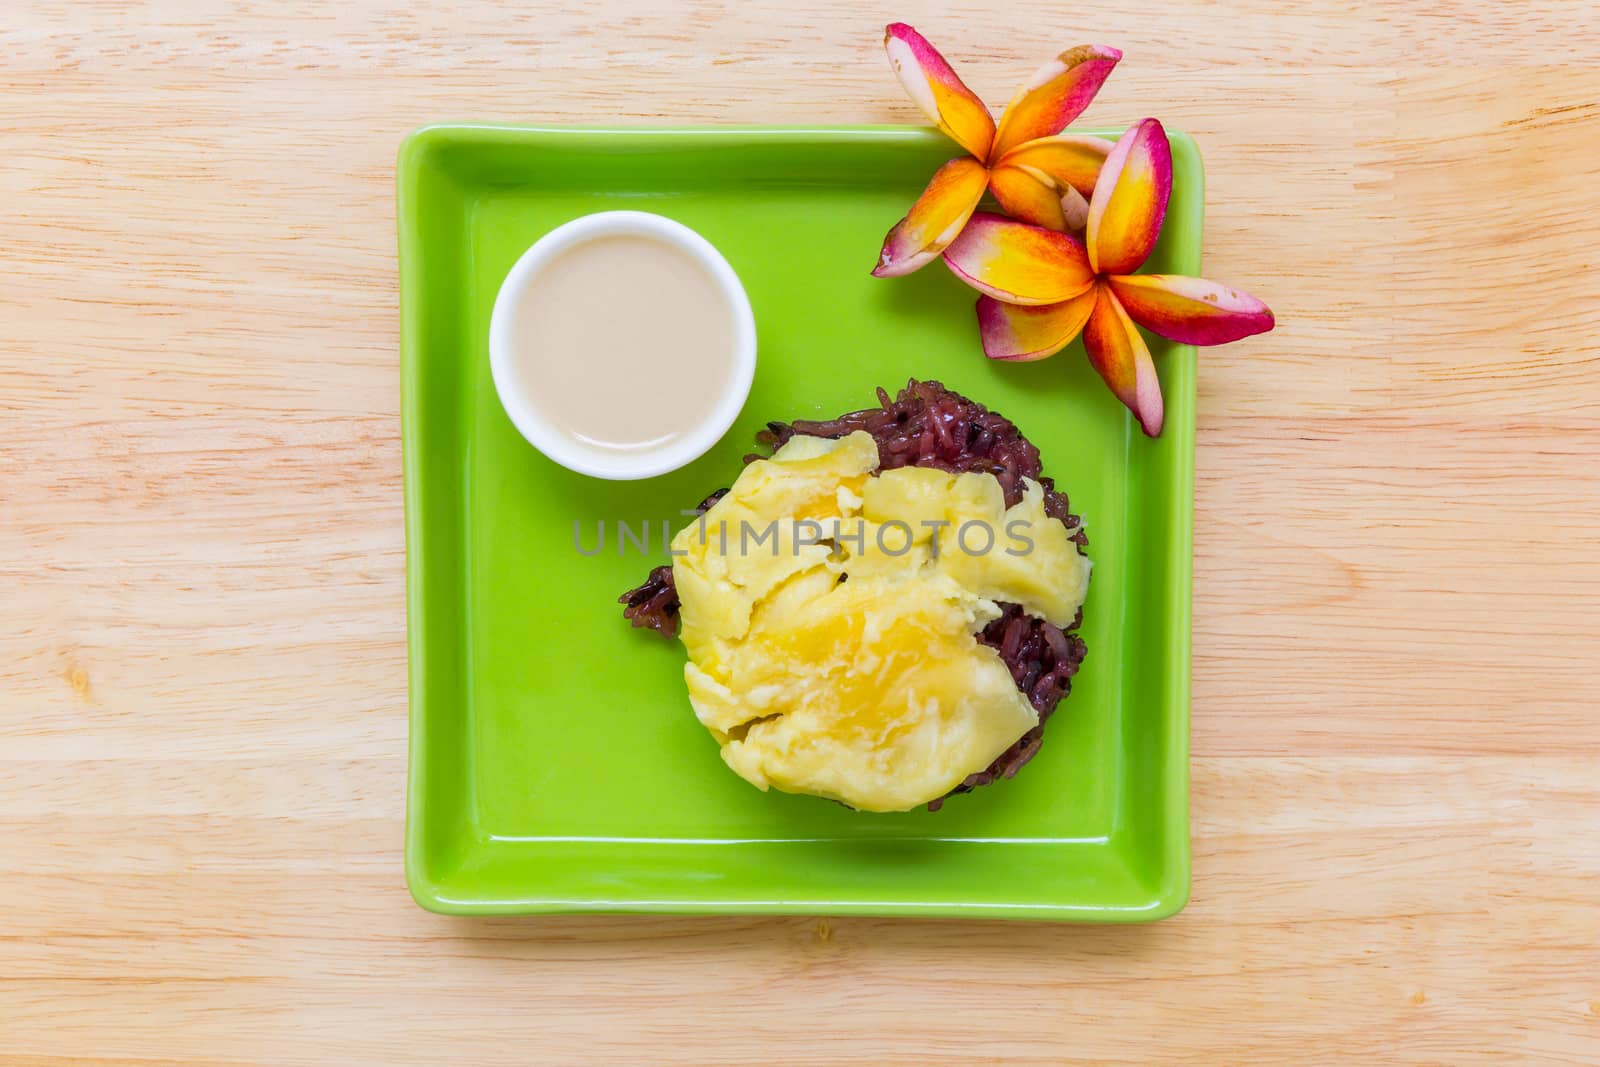 Durian with sticky rice is famous traditional Thai dessert menu.